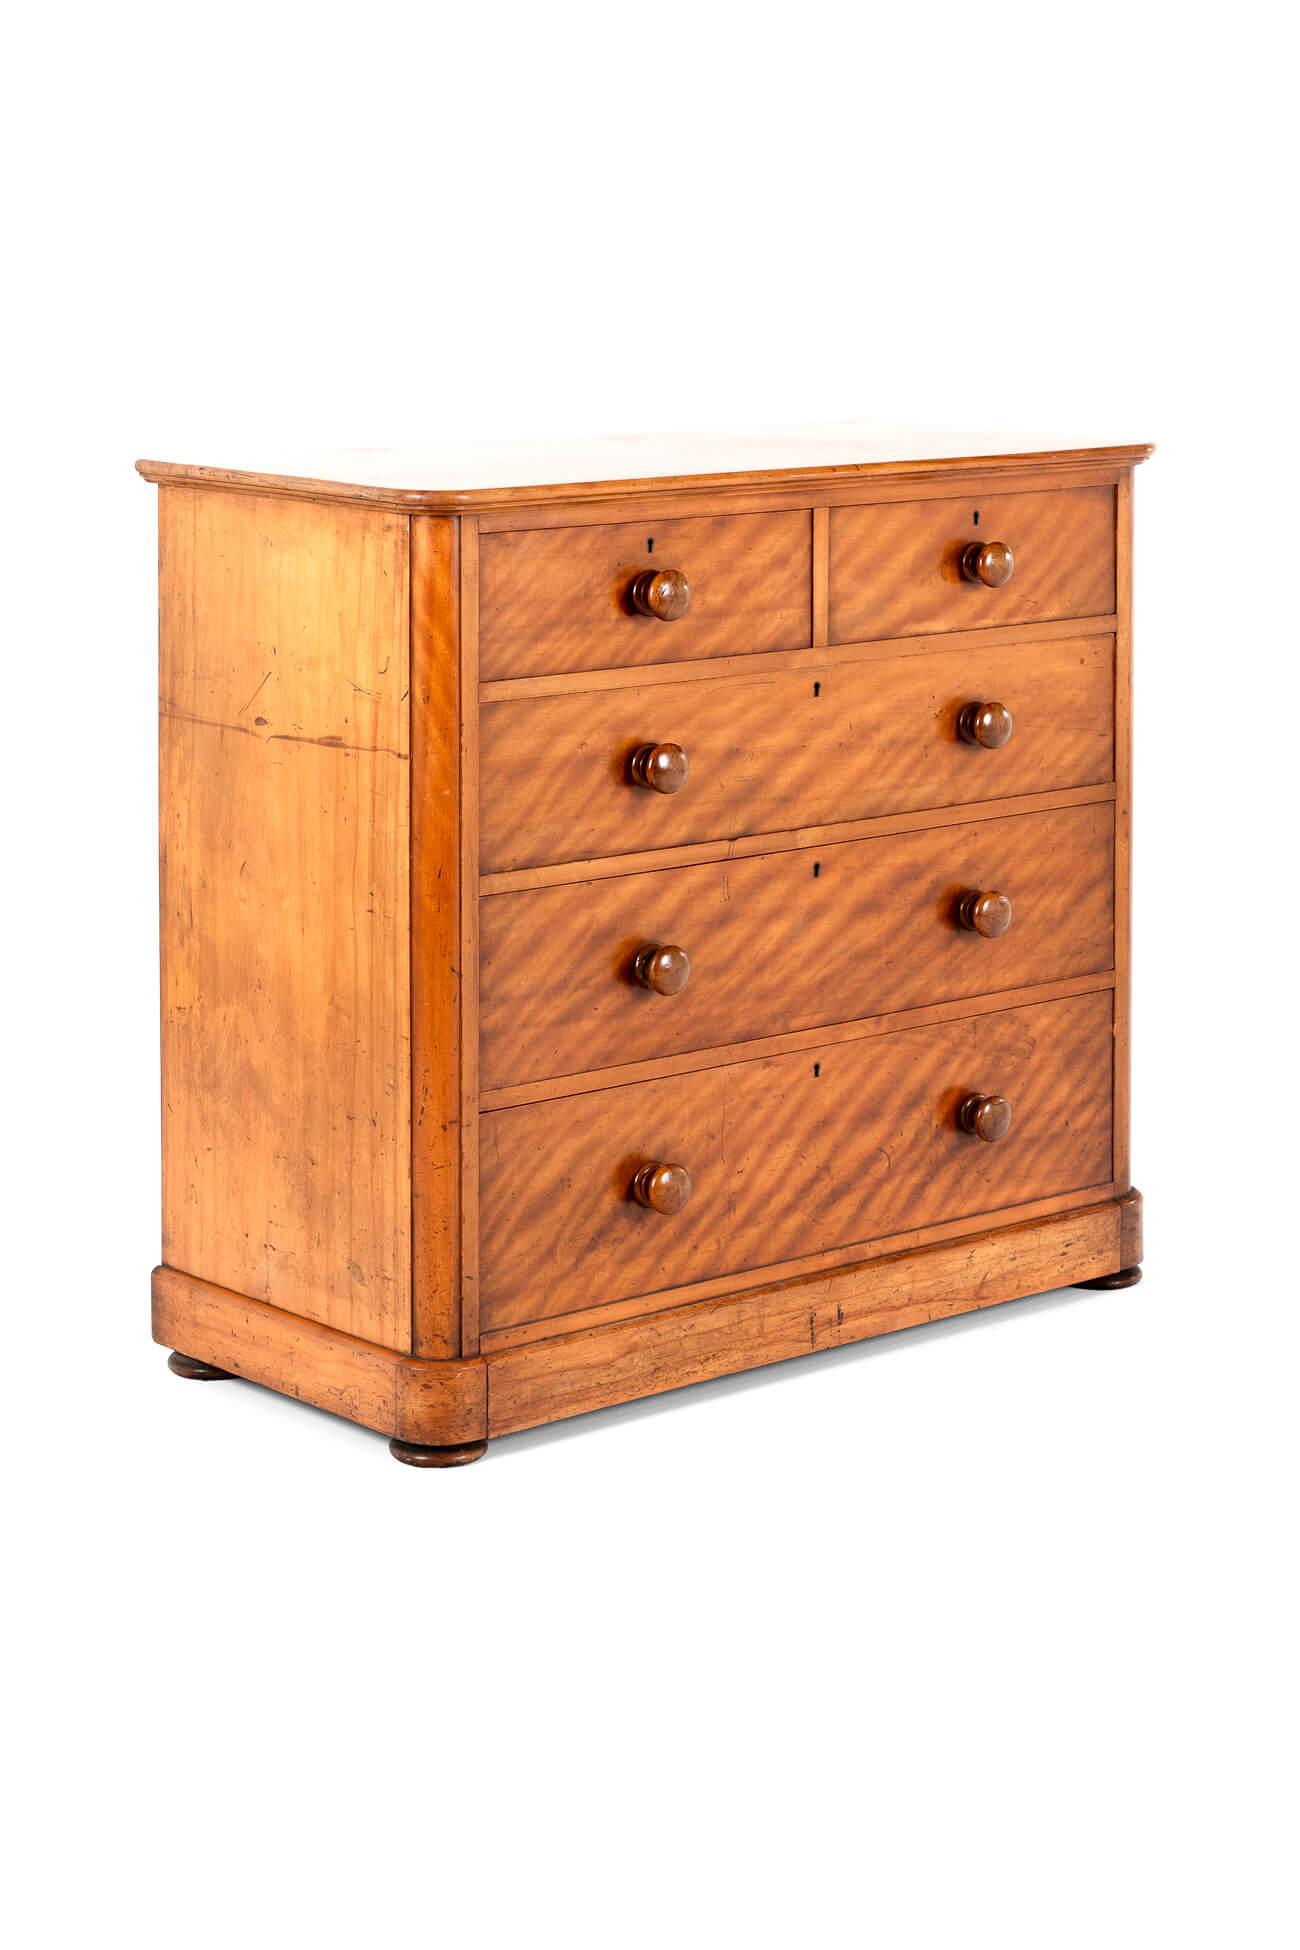 A well-proportioned Victorian satin birch chest of drawers with an arrangement of two short over three long drawers.

The drawers have the original bun handles, brass locks and escutcheons,all raised on a plinth base with diminutive flat bun